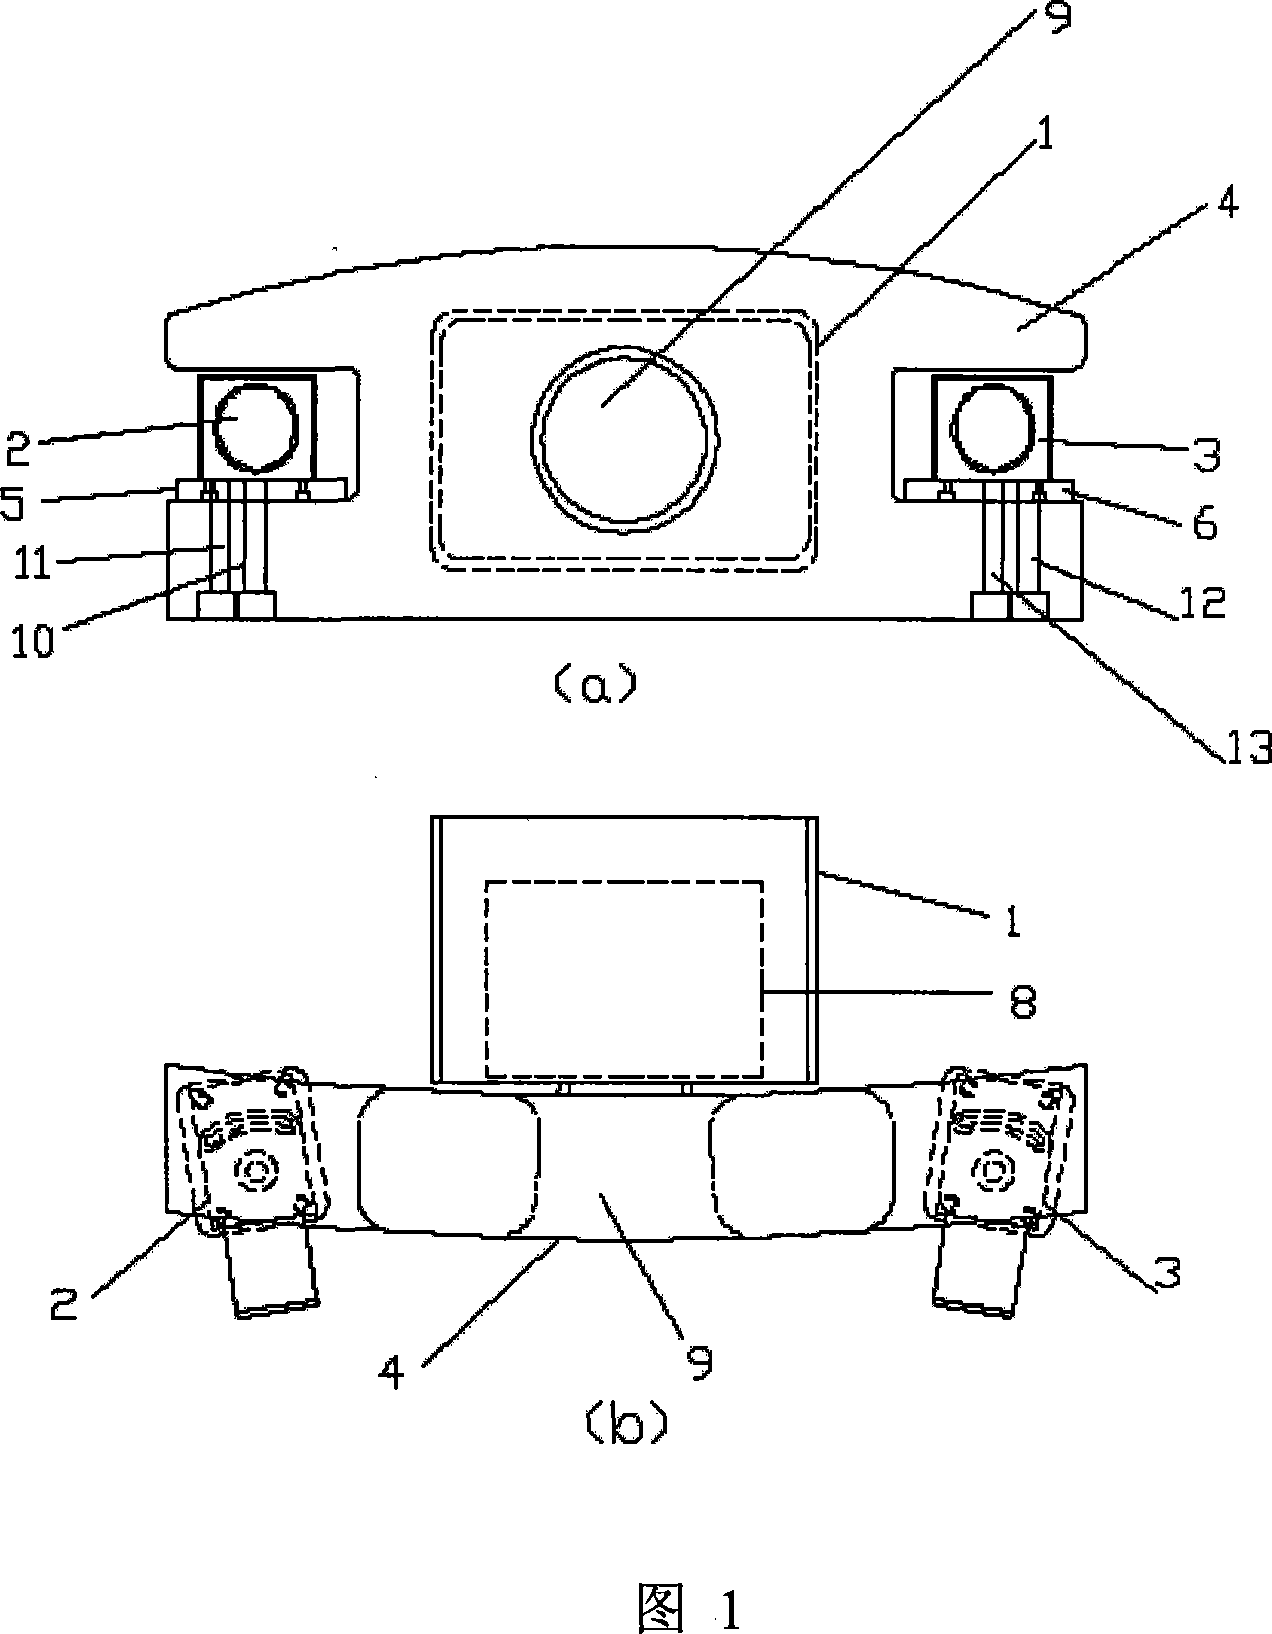 Face structure light scanning apparatus